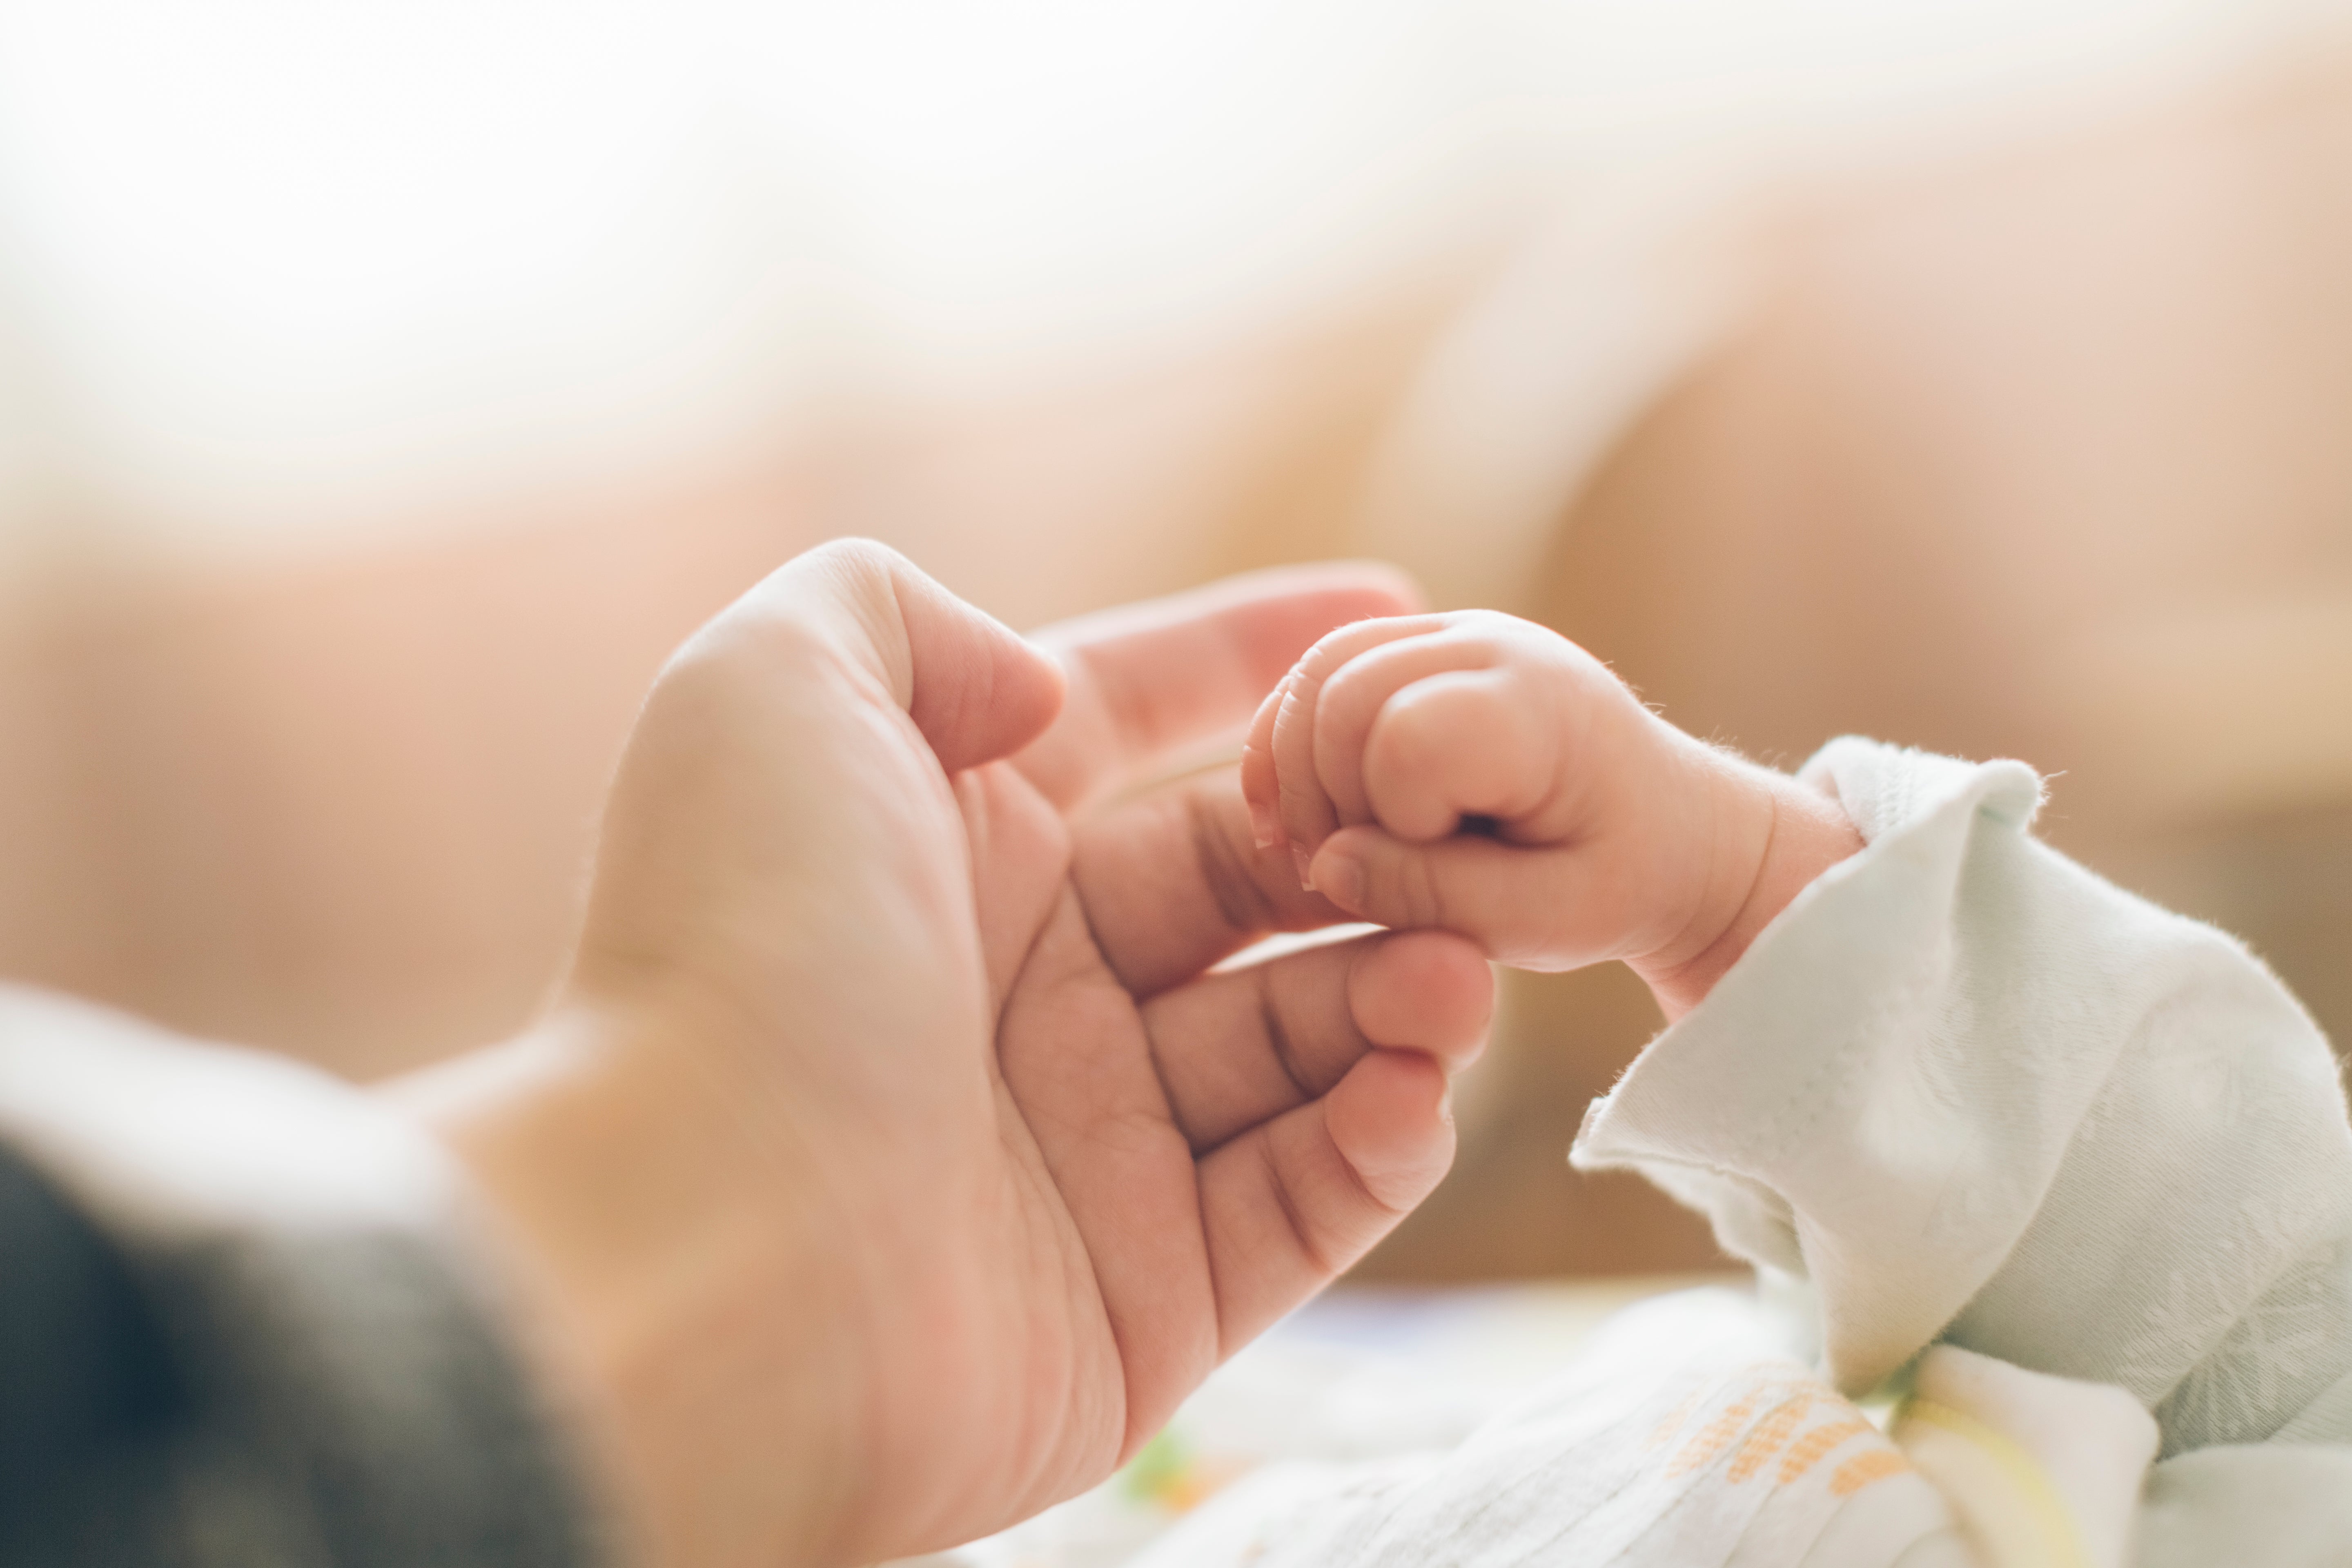 Could we prevent colic in babies by handling them differently?